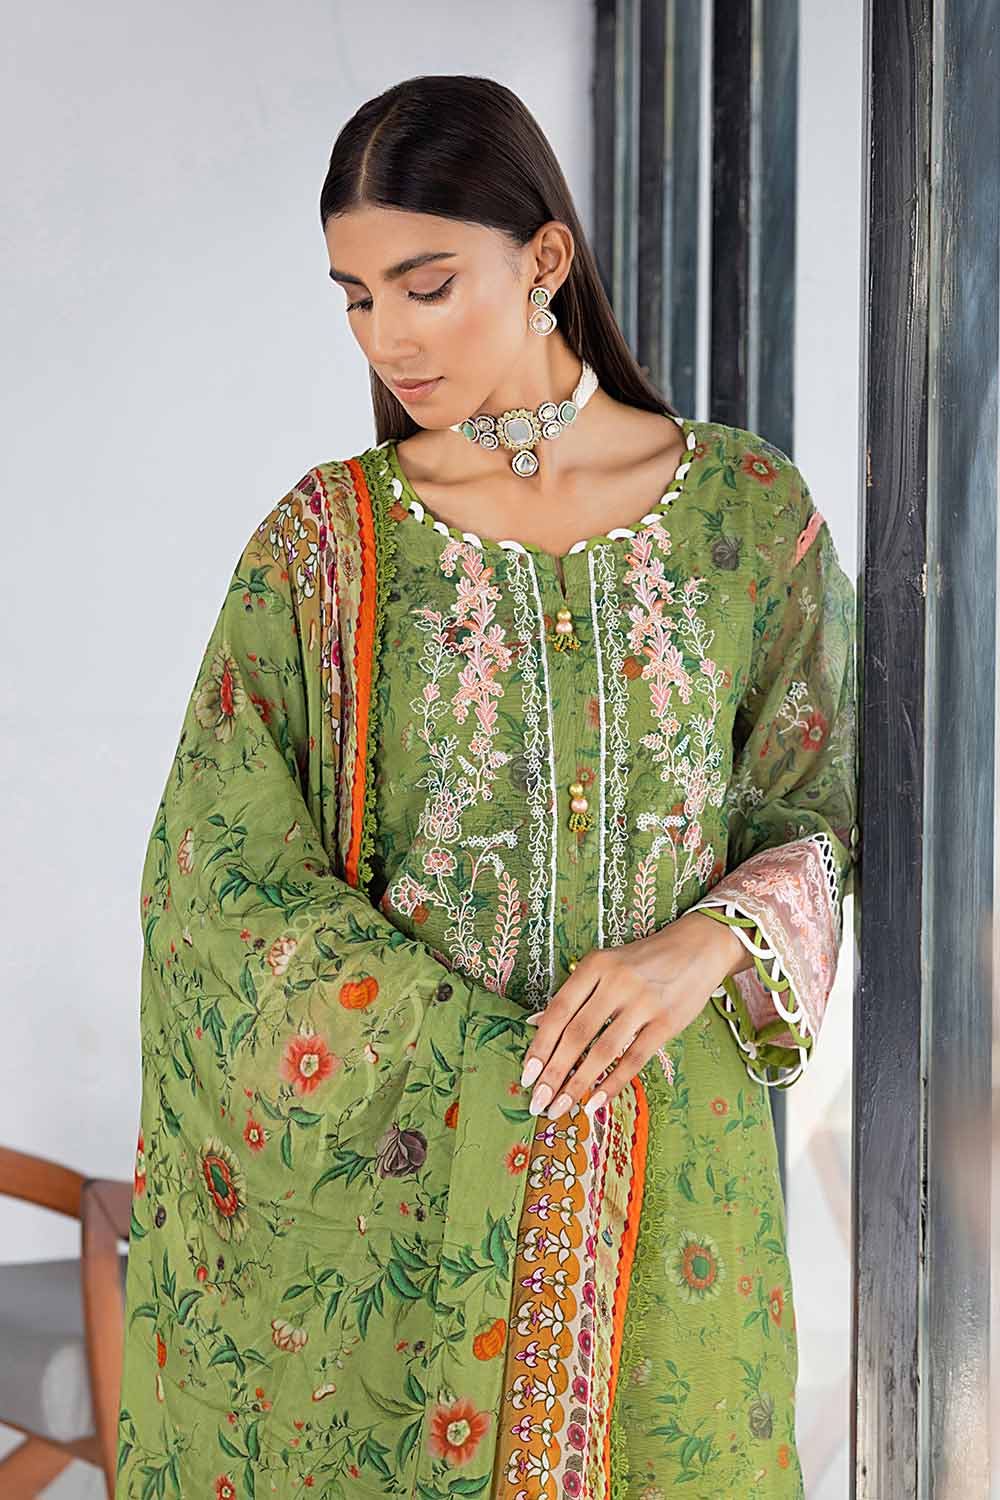 Gul Ahmed 3PC Embroidered Digital Printed Cotton Net Unstitched Suit with Digital Printed Silk Dupatta with Lace SSM-32031